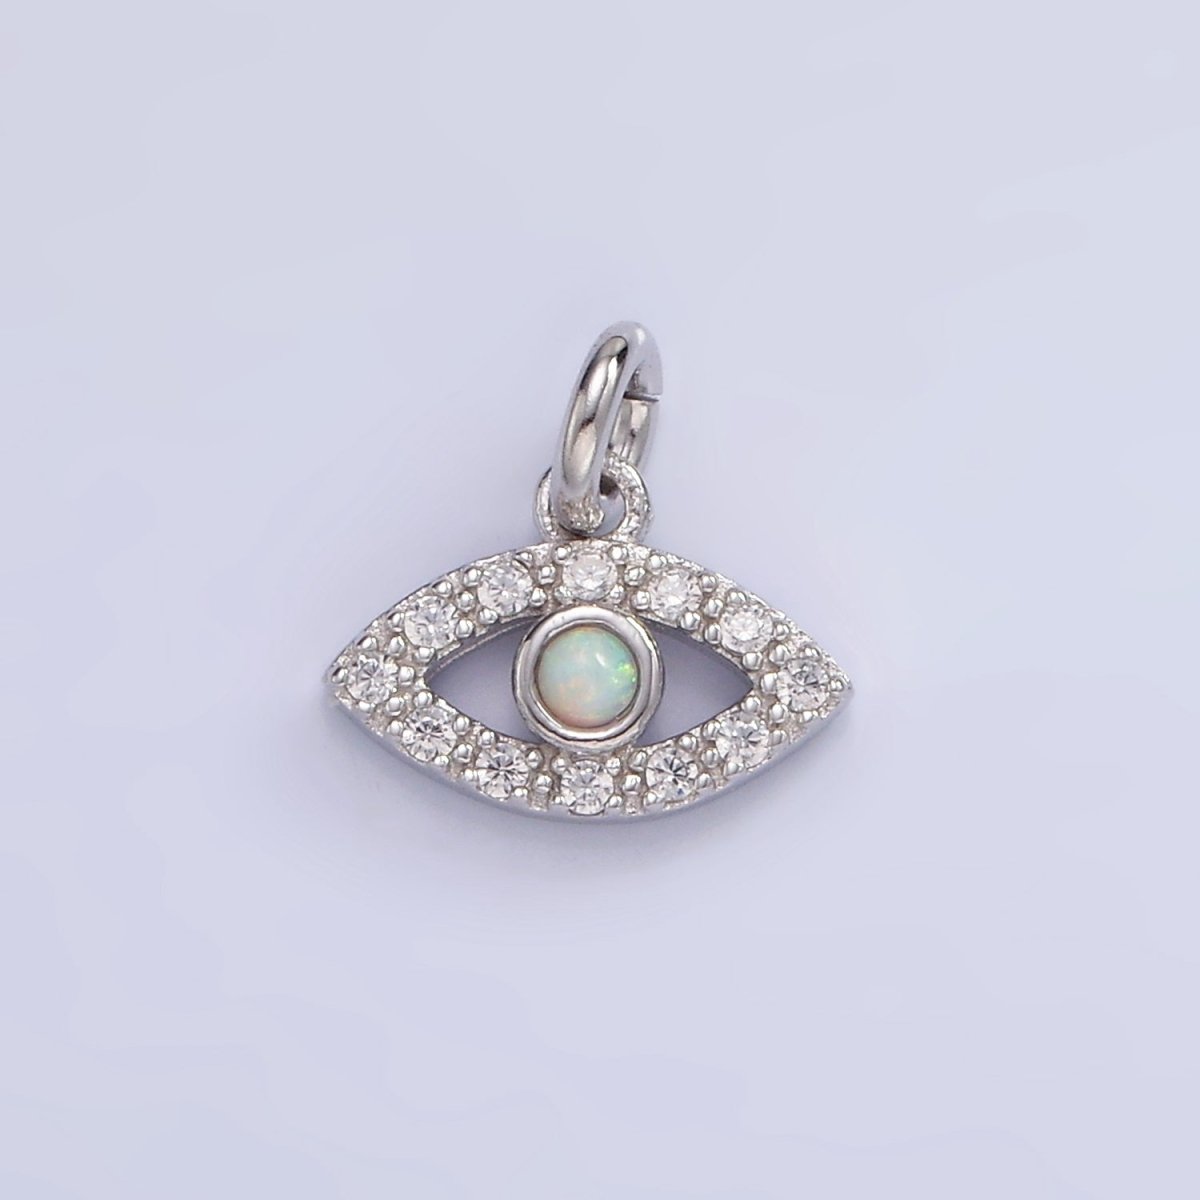 Mini S925 Sterling Silver Evil Eye Charm with Clear Opal Stone | SL-476 - DLUXCA